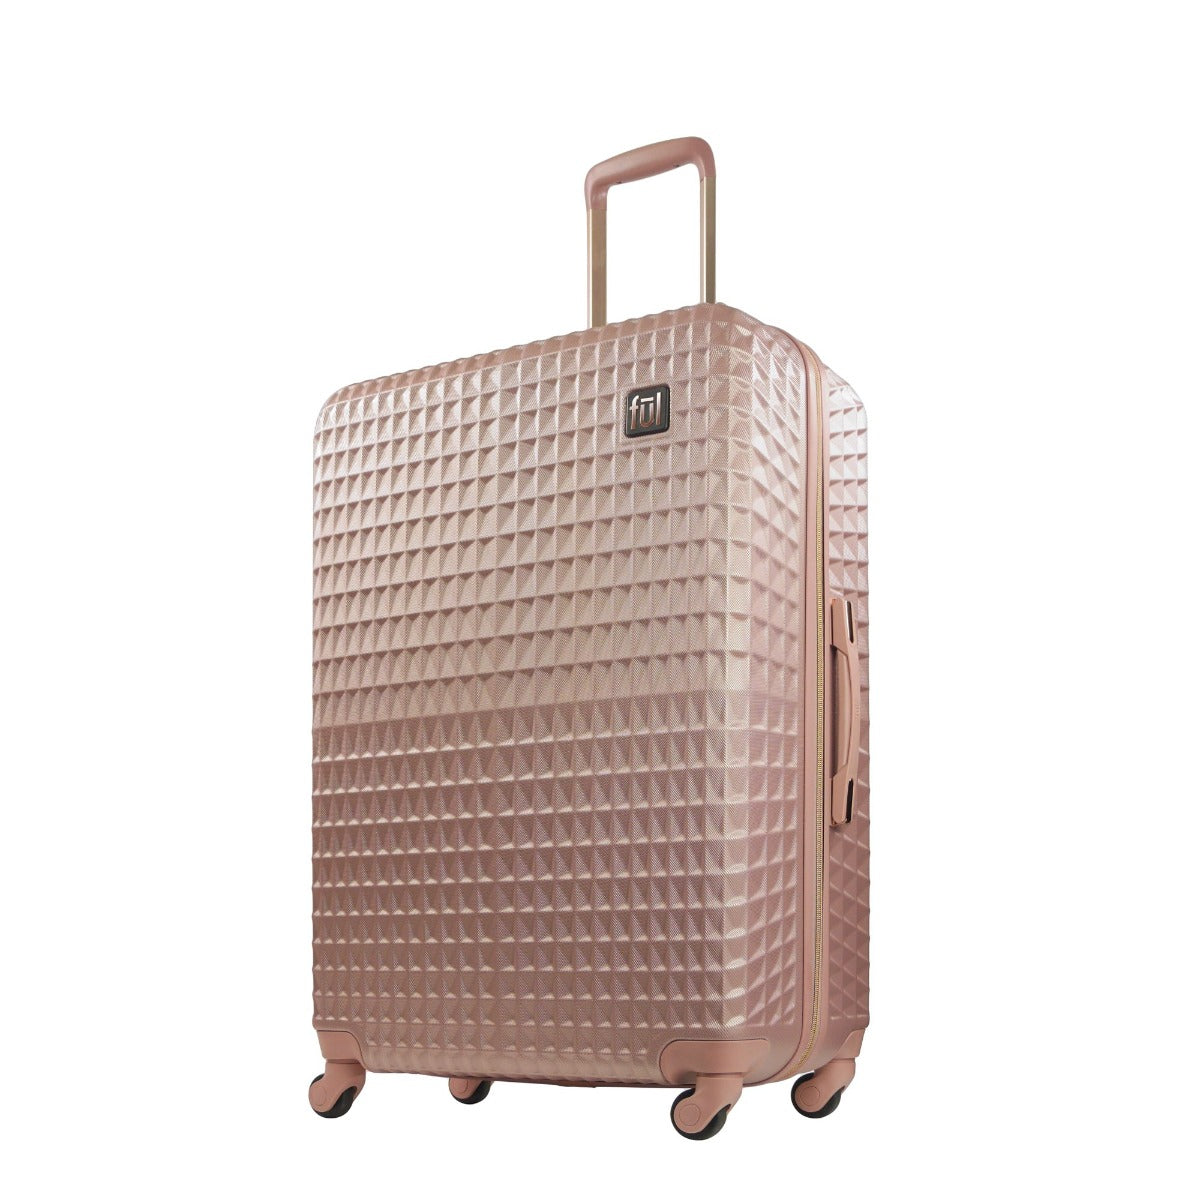 Ful Geo 31" hard-sided spinner suitcase luggage rose gold check-in baggage